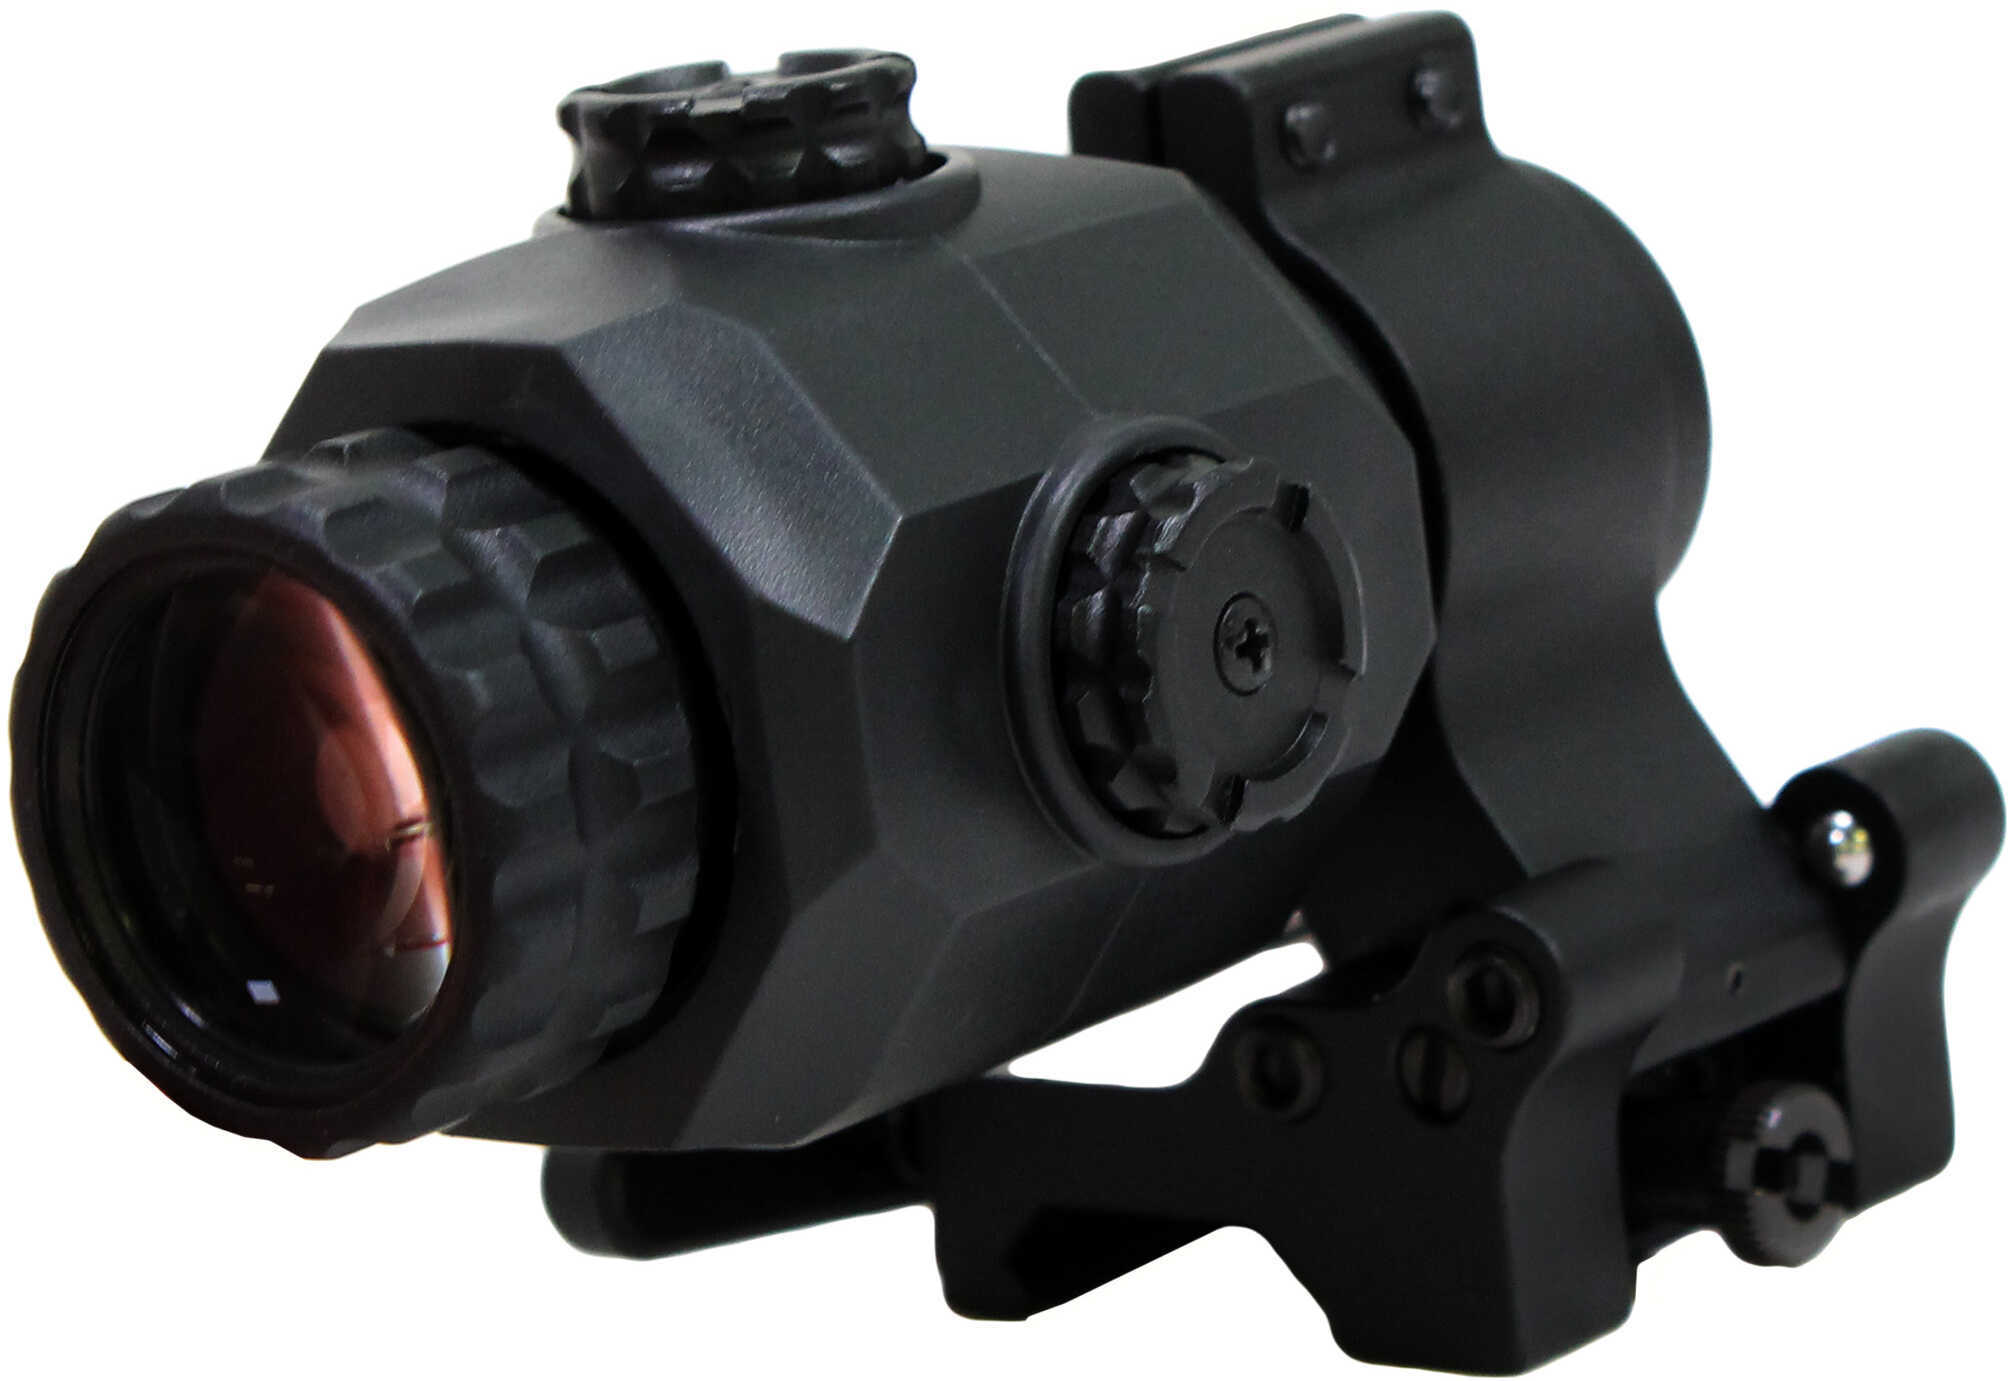 Sightmark XT-3 Tactical Magnifier with LQD Flip to Side Mount Md: SM19062